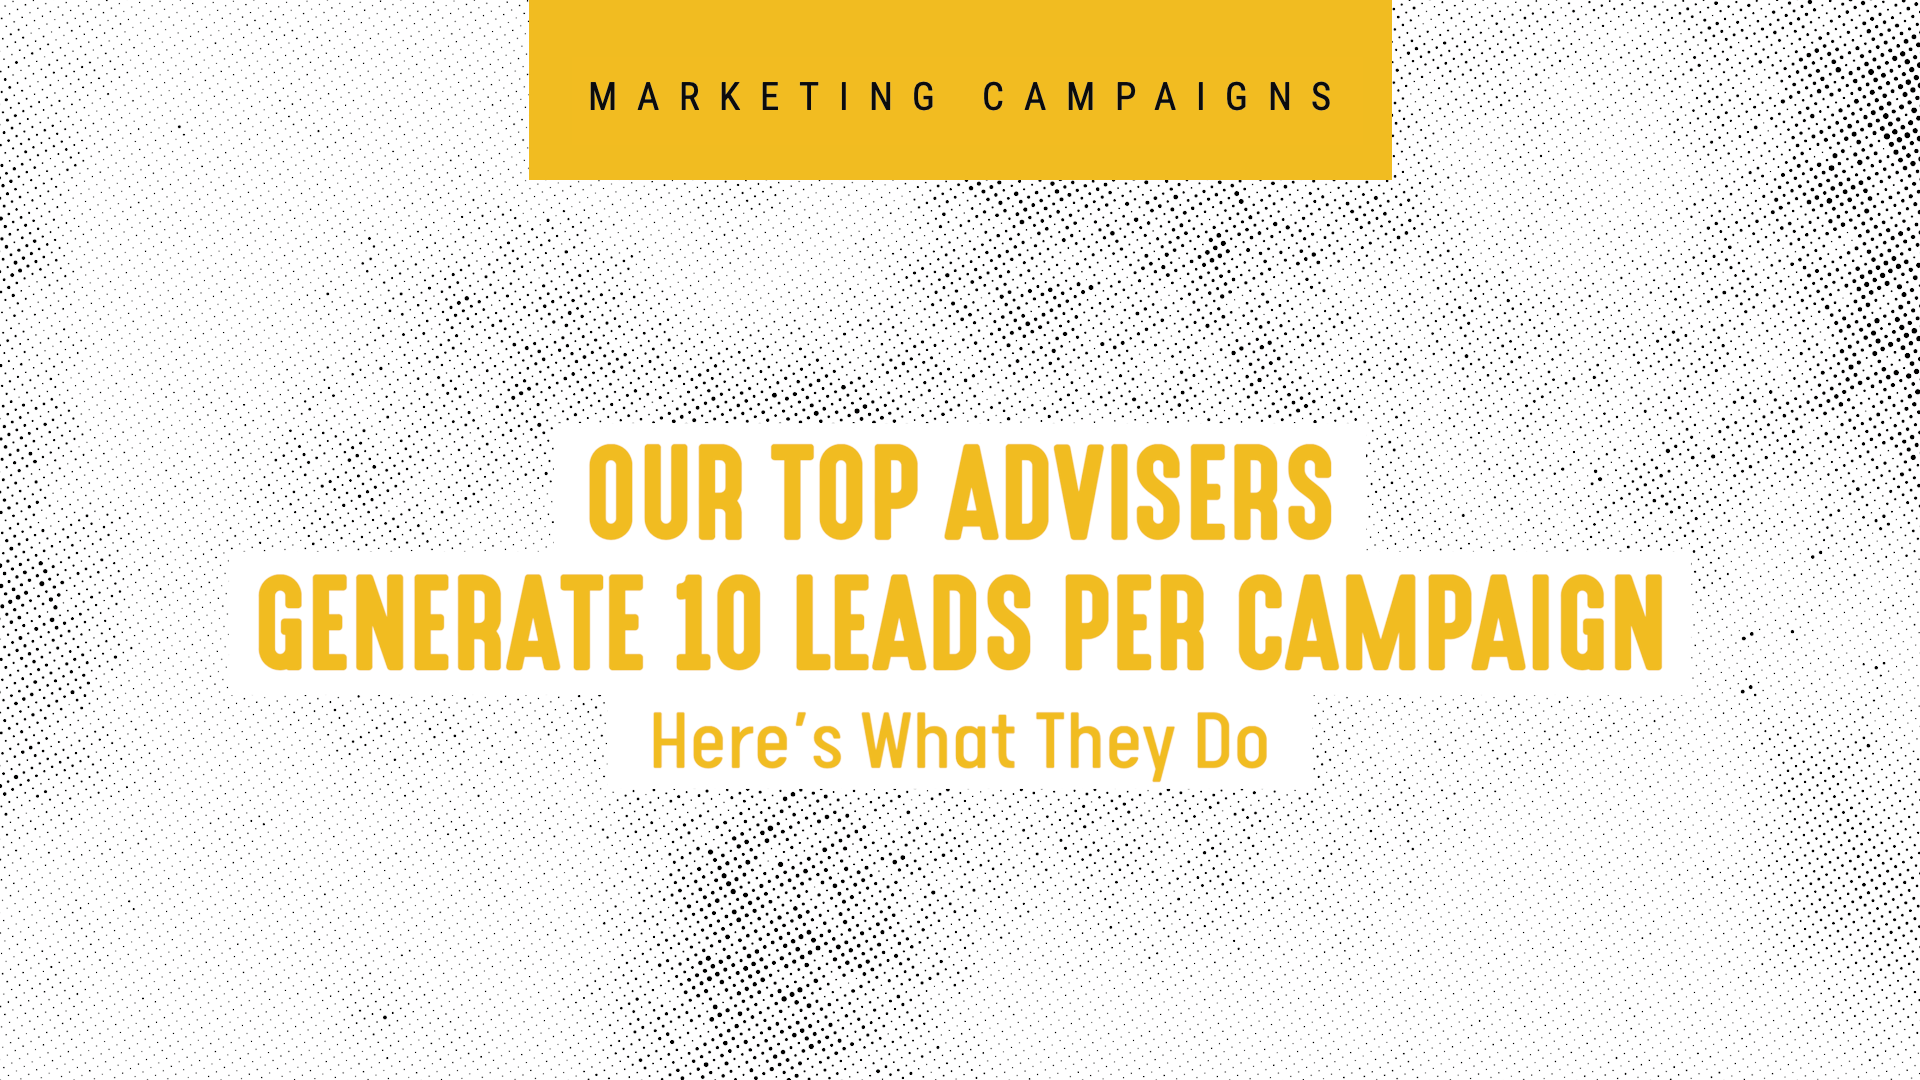 How Can Advisers Generate More Leads